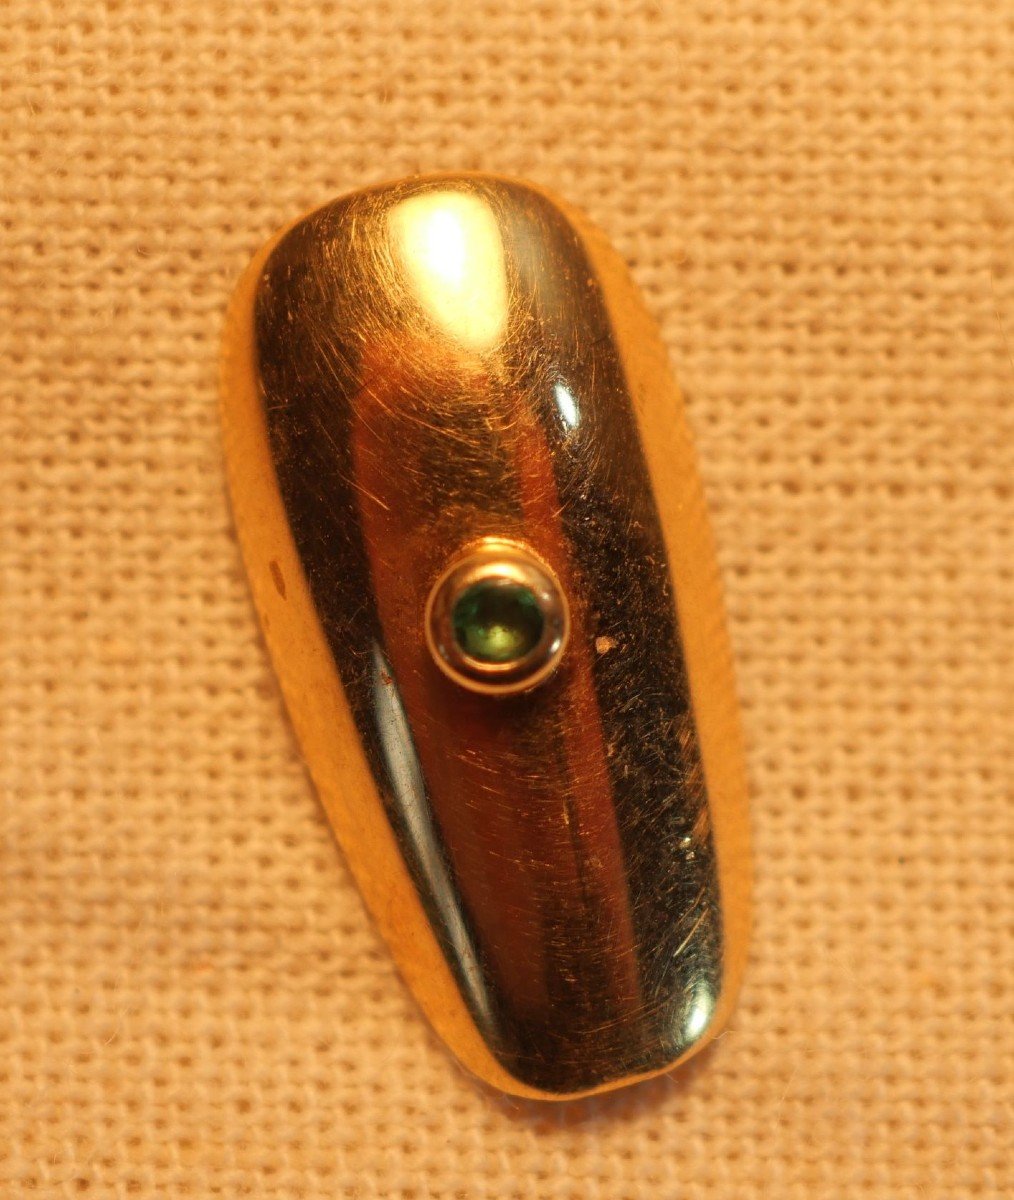 Gold Nail Decorated With An Emerald - Eagle's Head Hallmark - 20th Century-photo-2